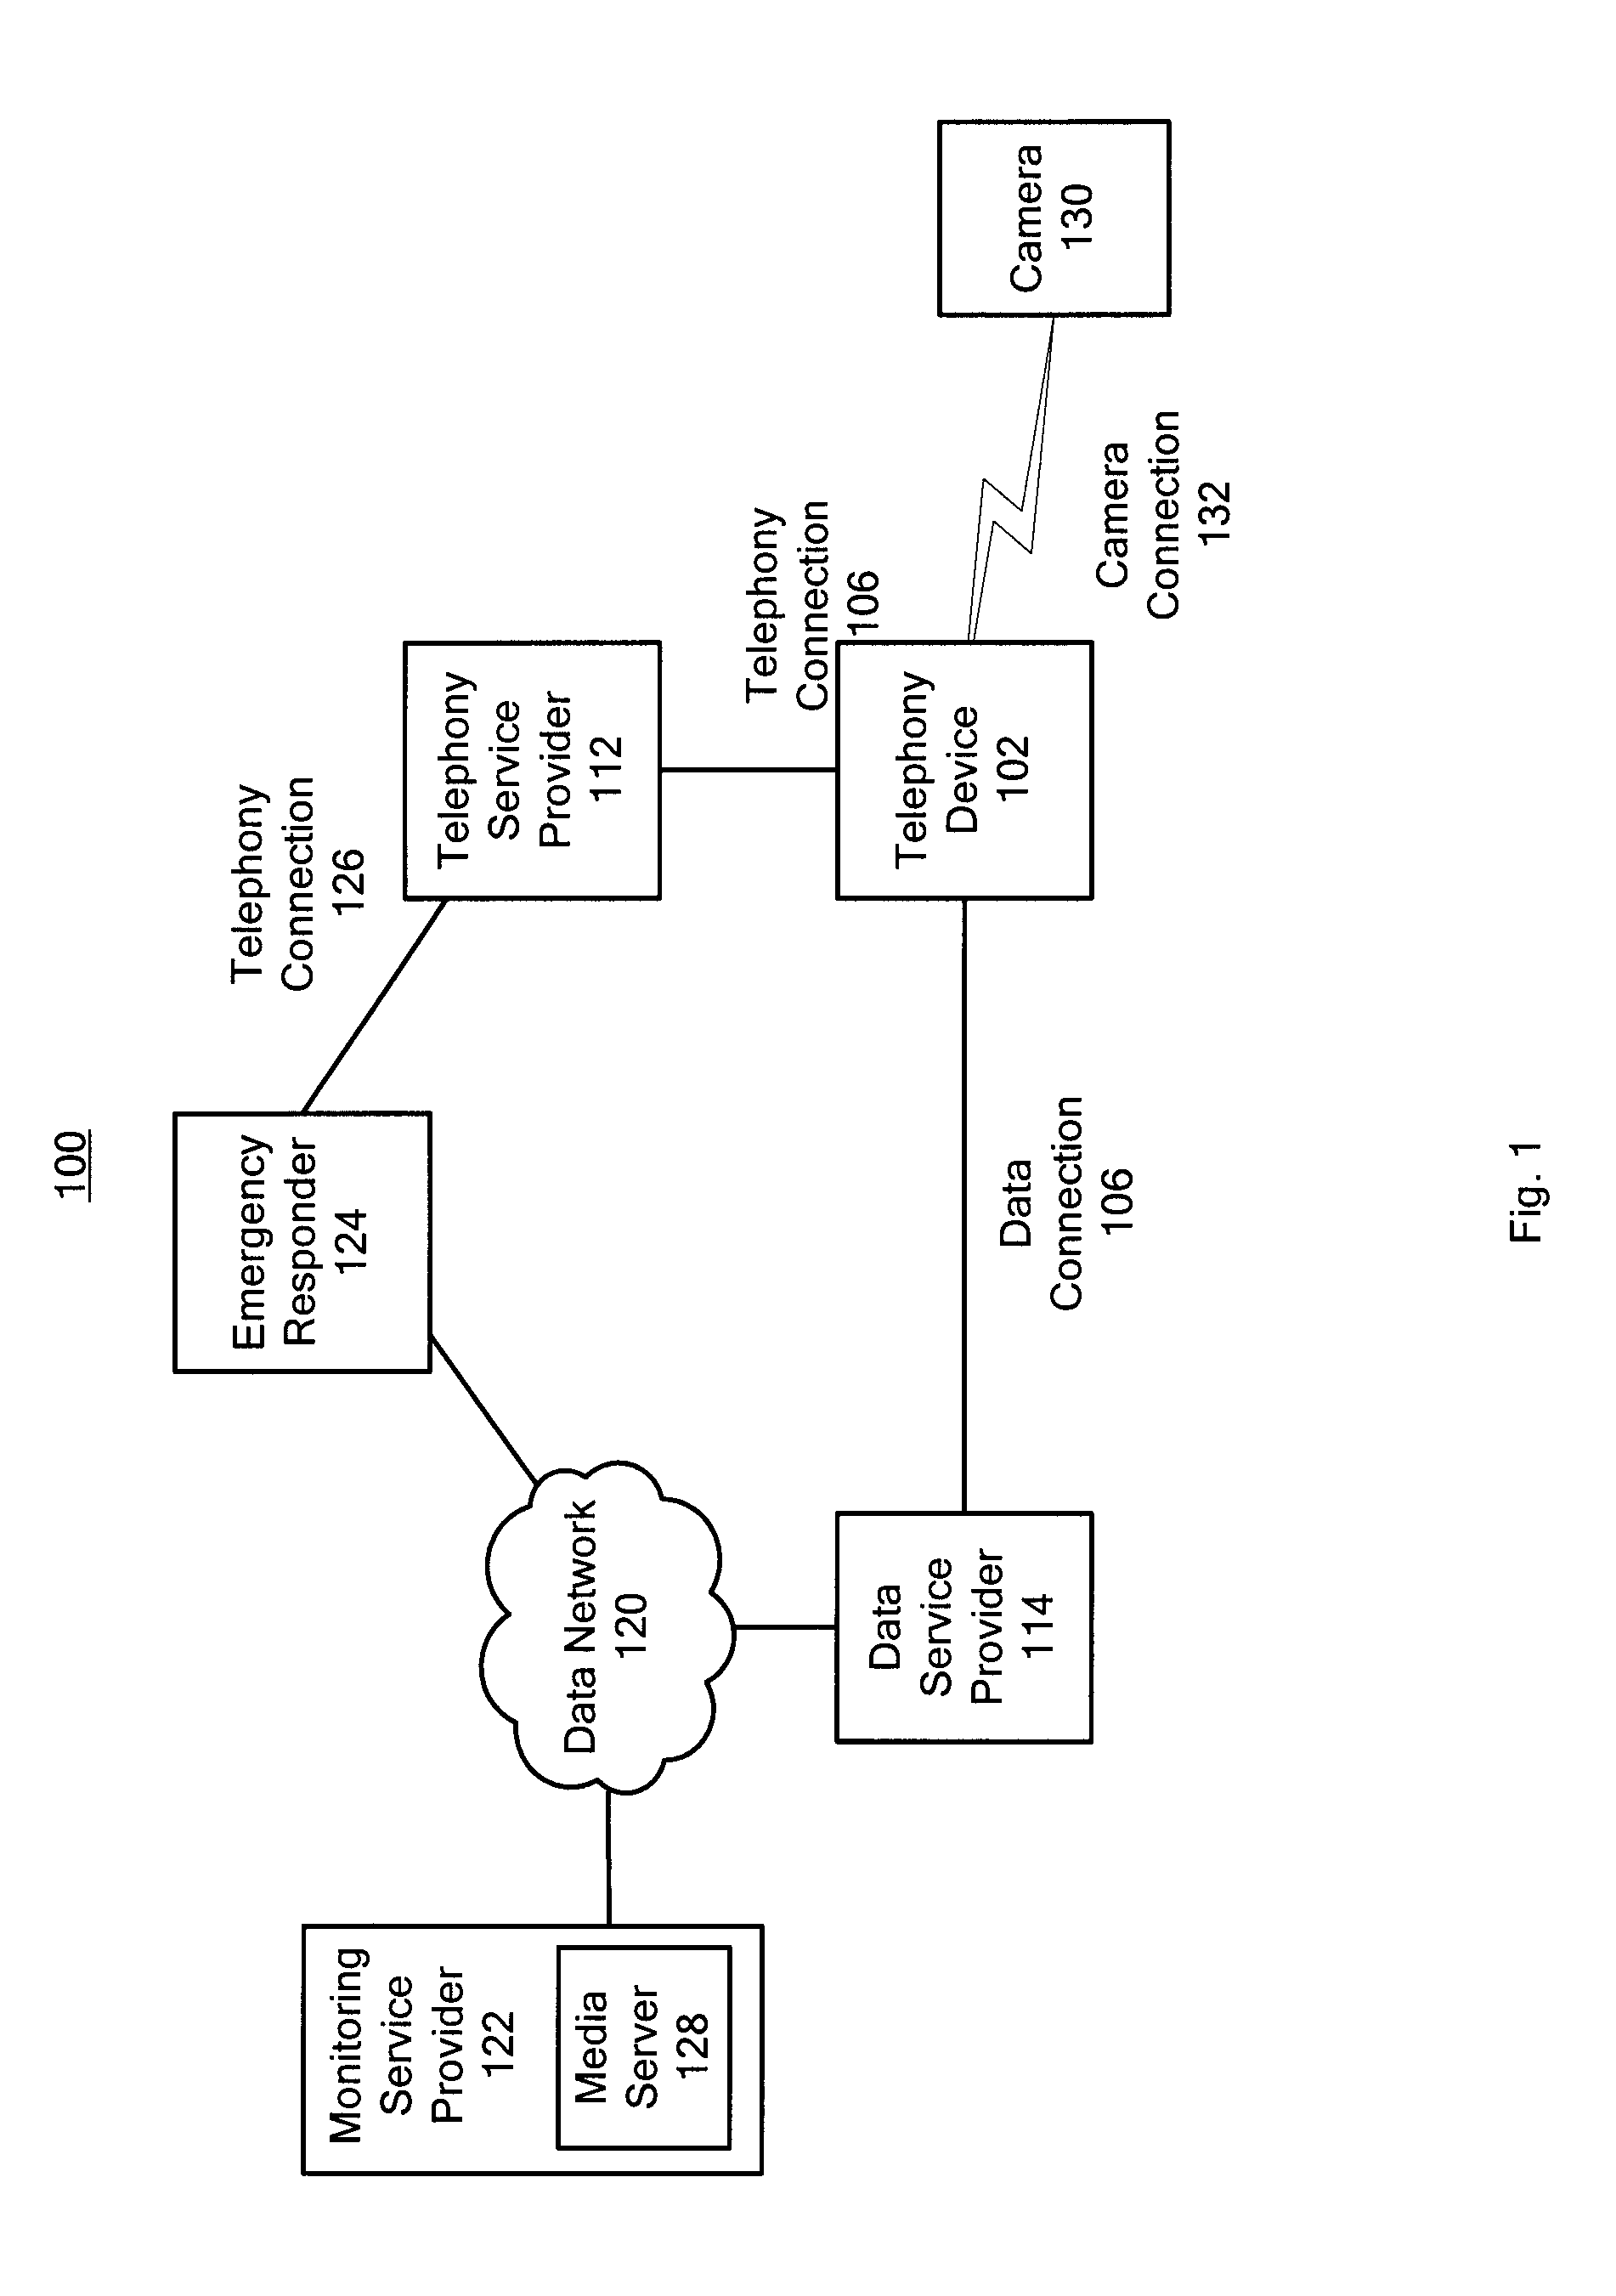 System and method for remotely controlling a camera